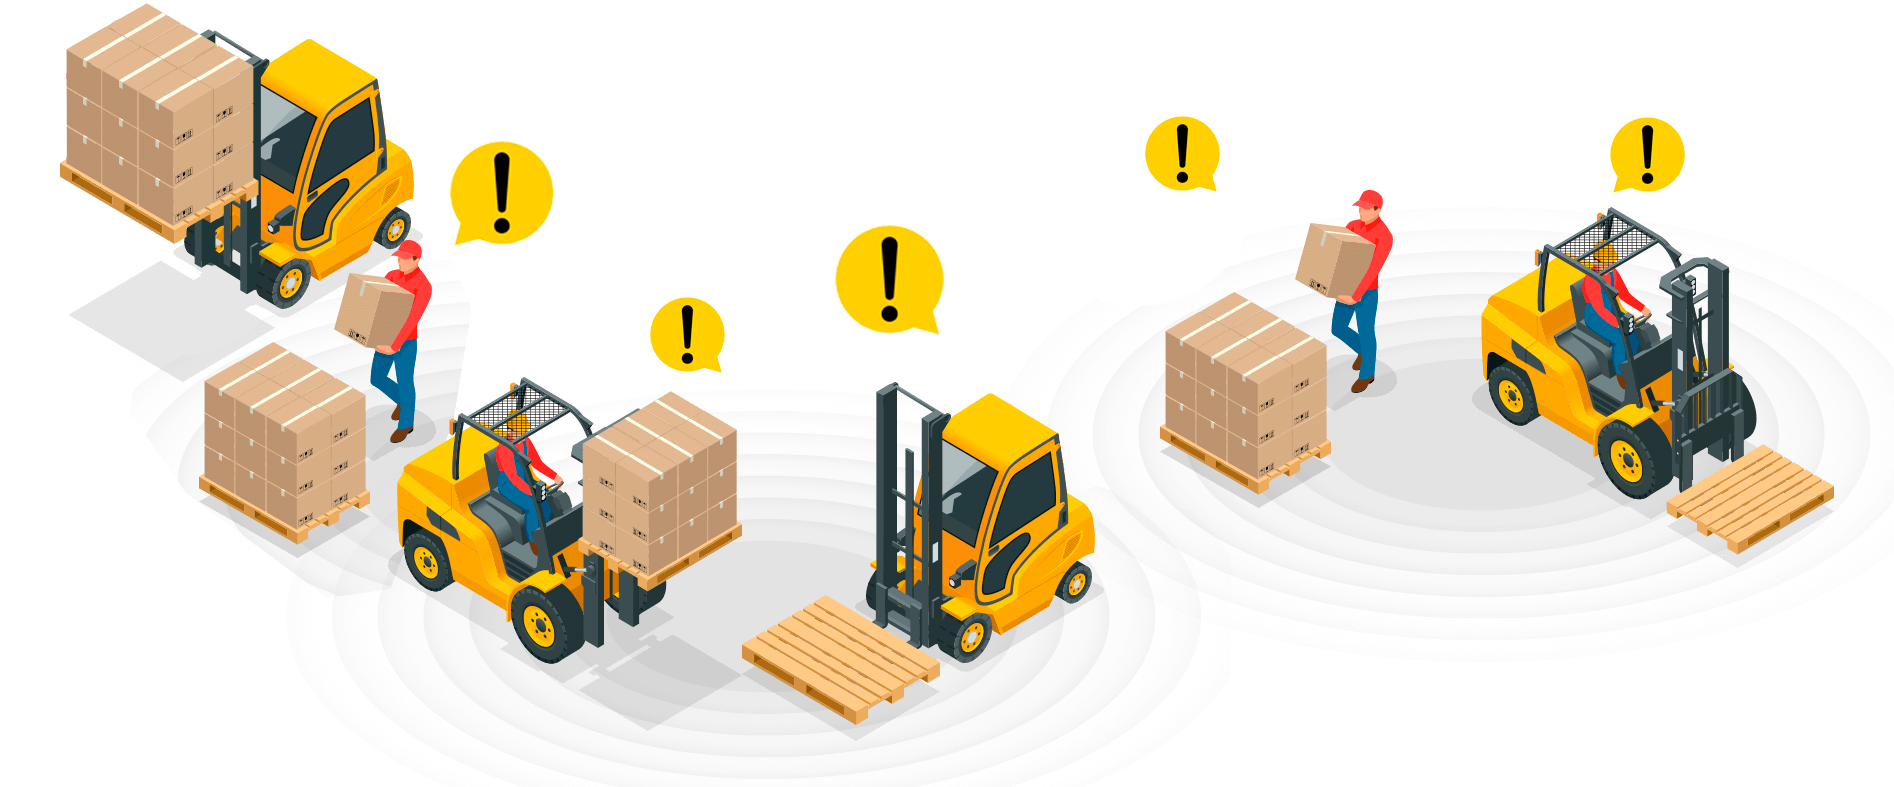 Forklift Traffic Has Increased, So The Risk For Forklift Related Accidents